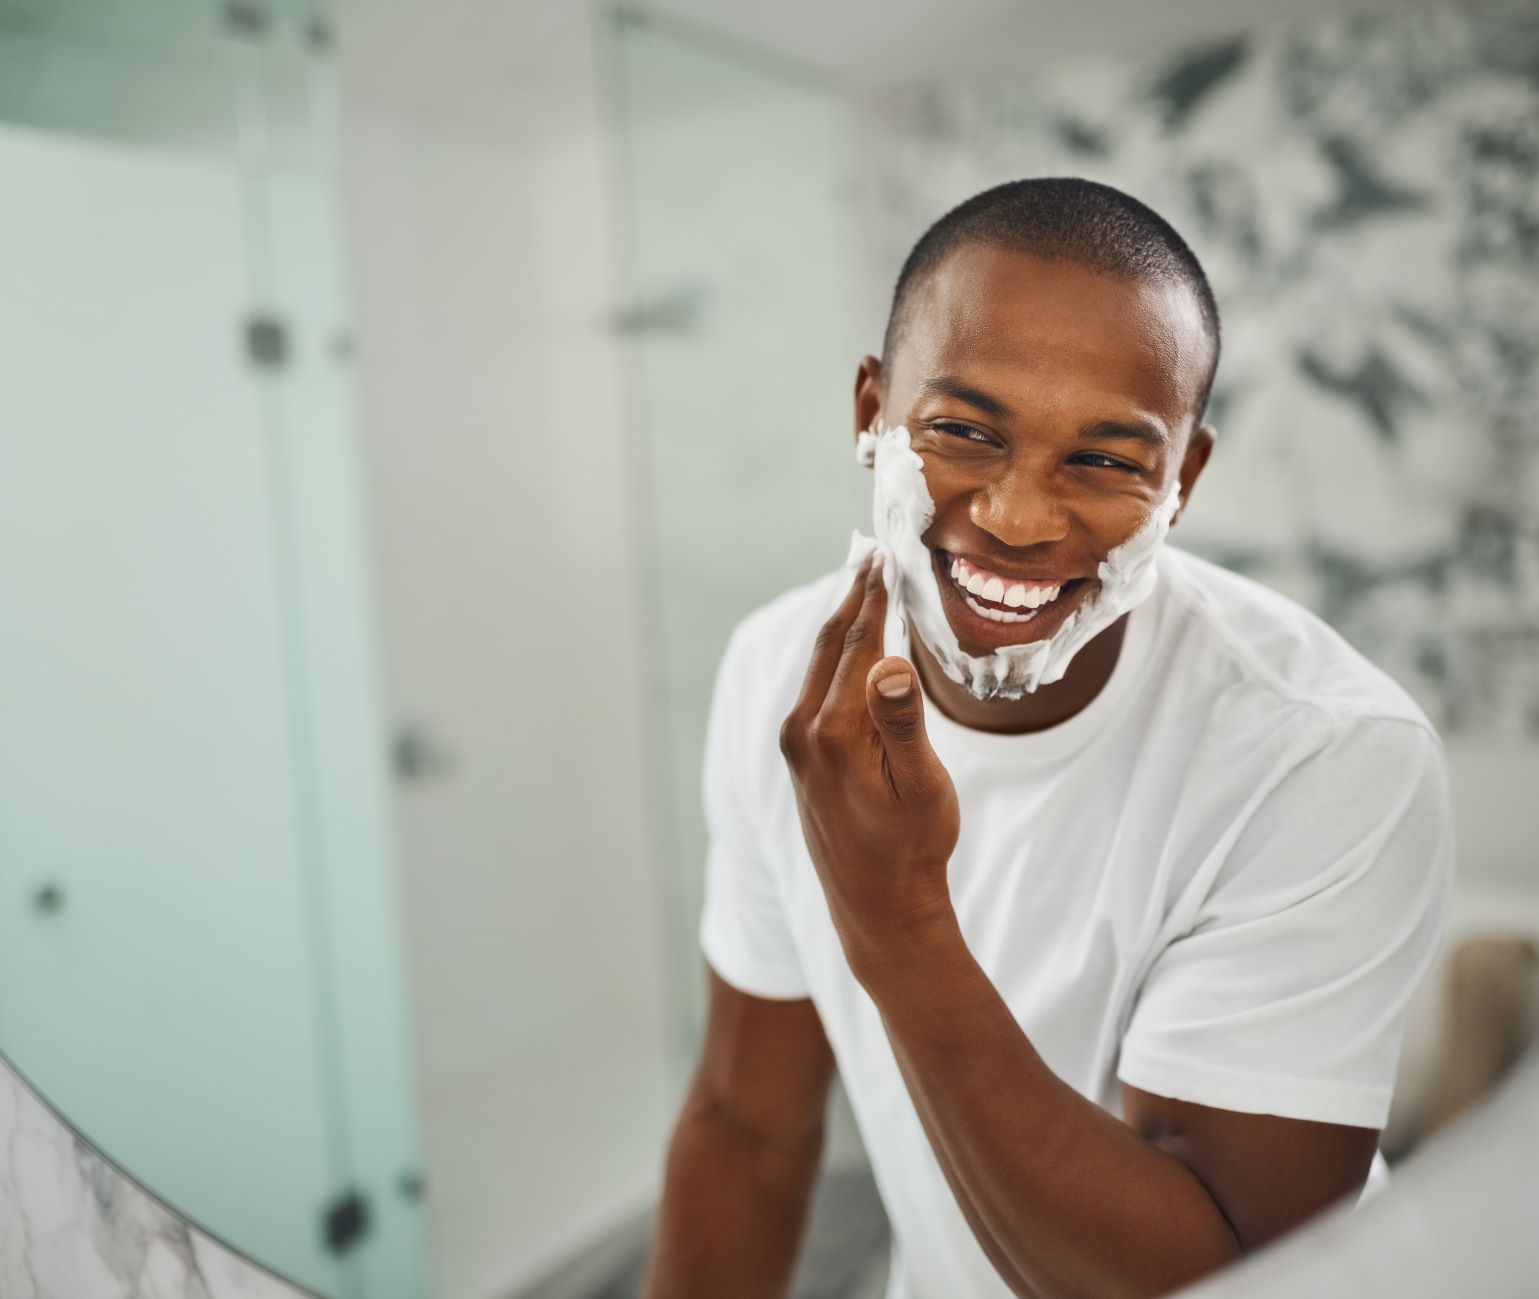 How To Have The Ultimate At-Home Shave